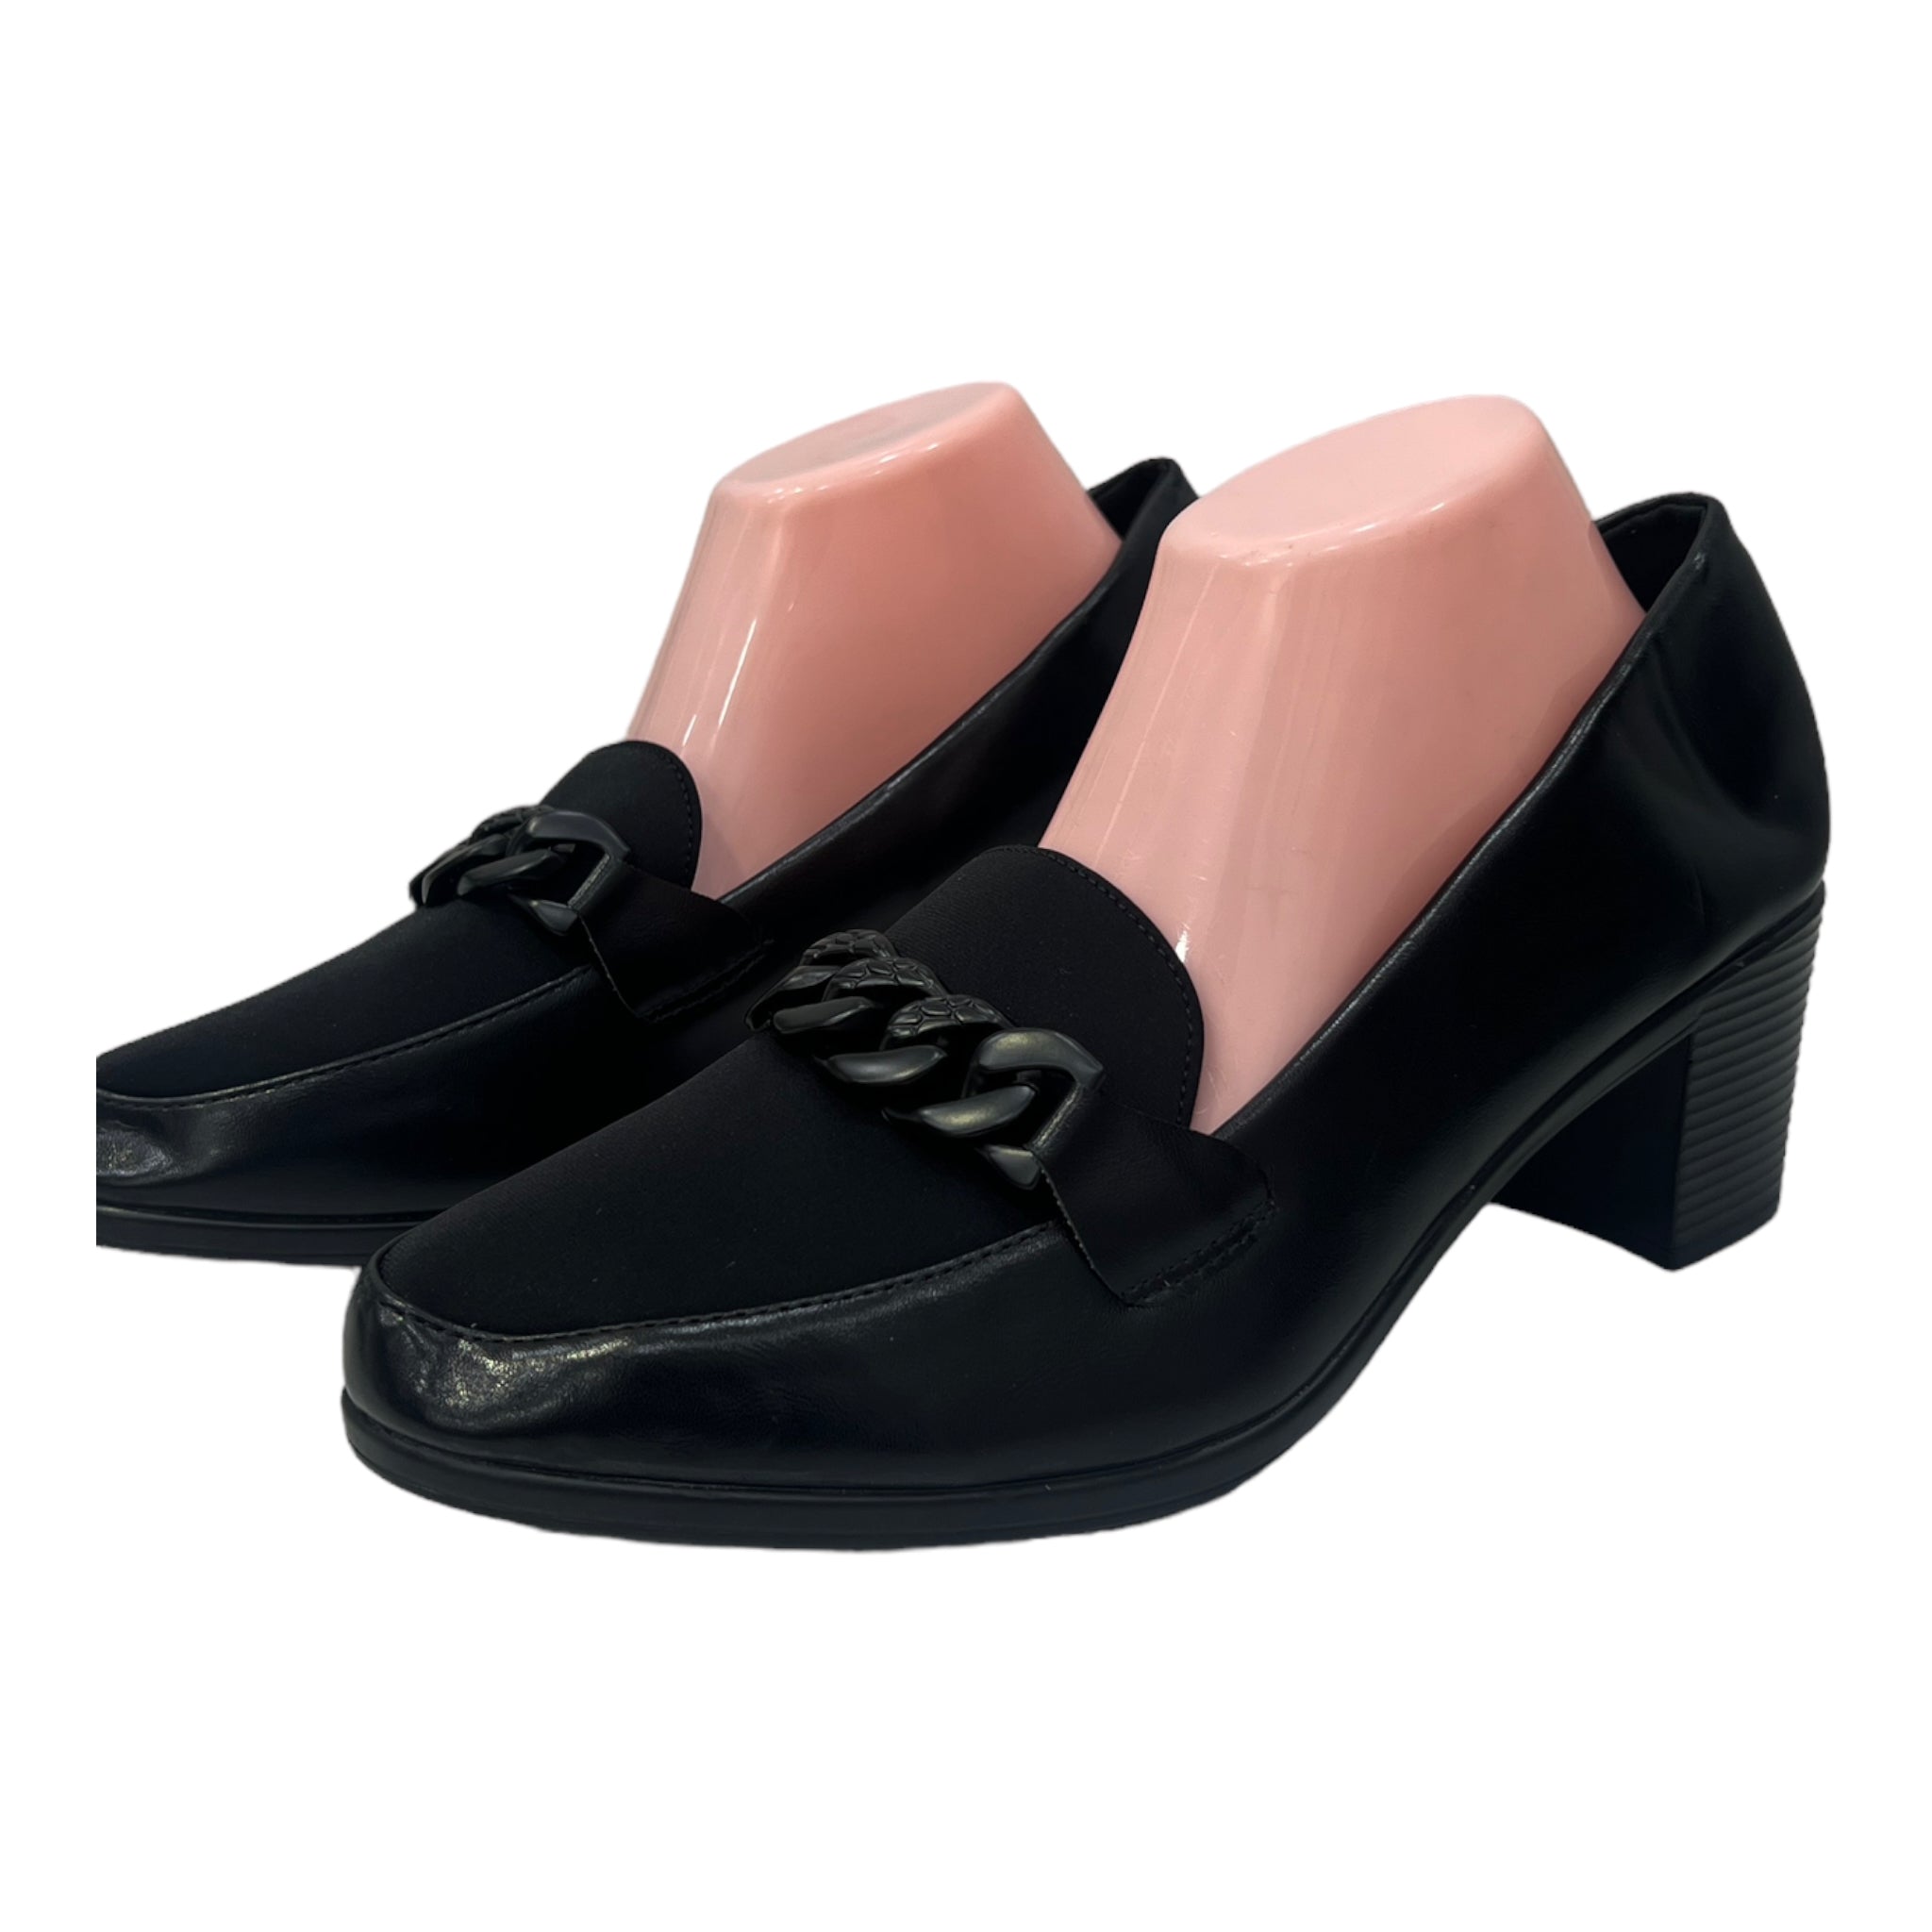 MODA BLACK FAUX CHAIN DETAIL HEELED LOAFERS